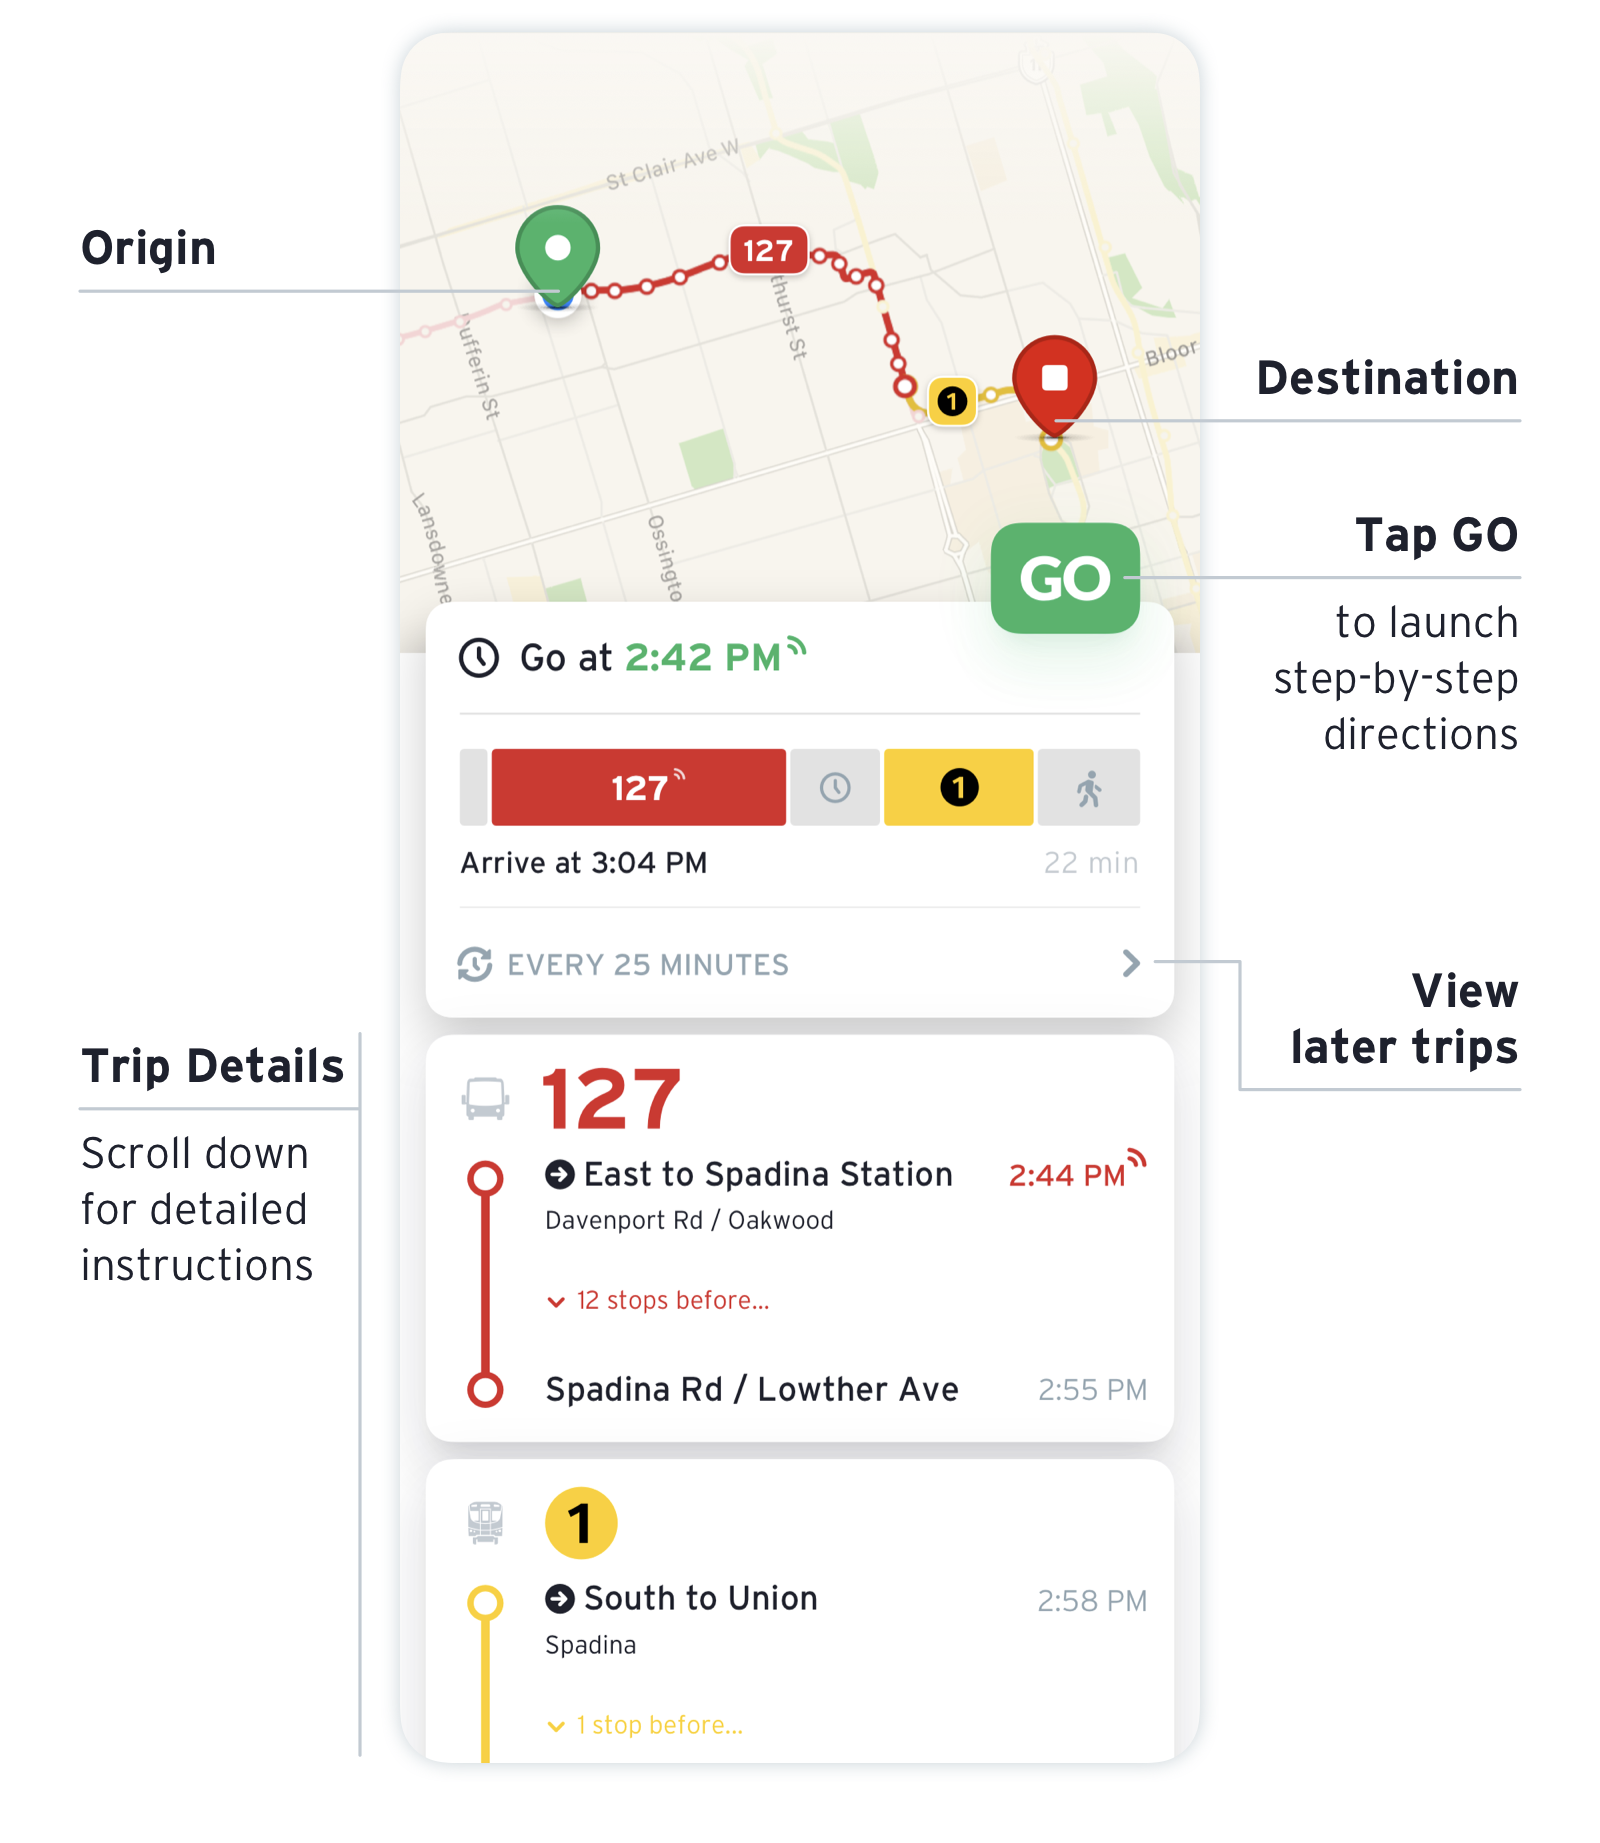 Transit App screenshot showing a detailed view of the entire trip